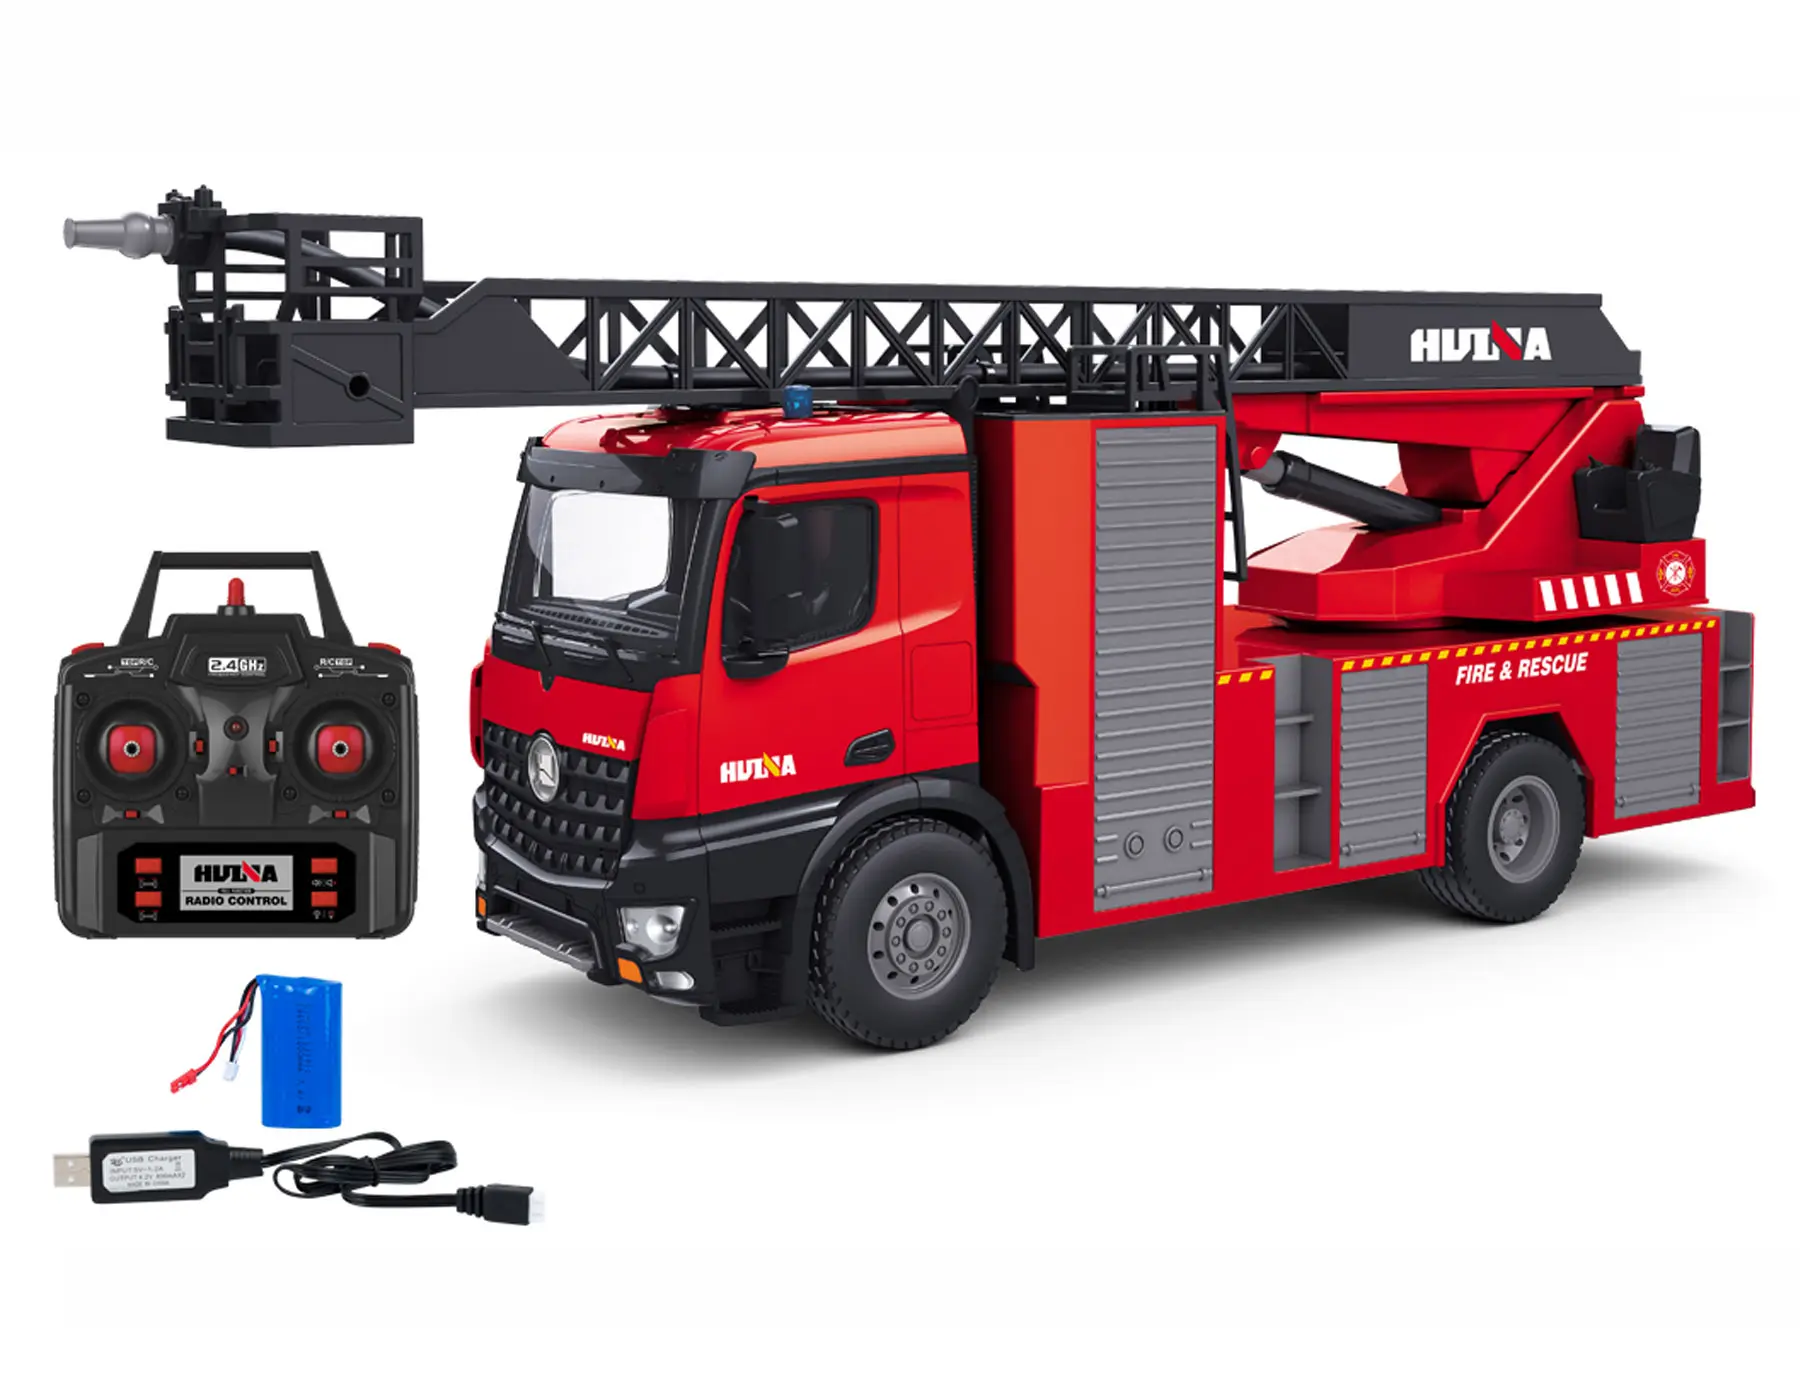 1/14 Huina 1561 Remote Control Sprinkler Fire Truck 22CH 2.4GHz RC Engineering Fire Truck toy with Fire Ladder and Light